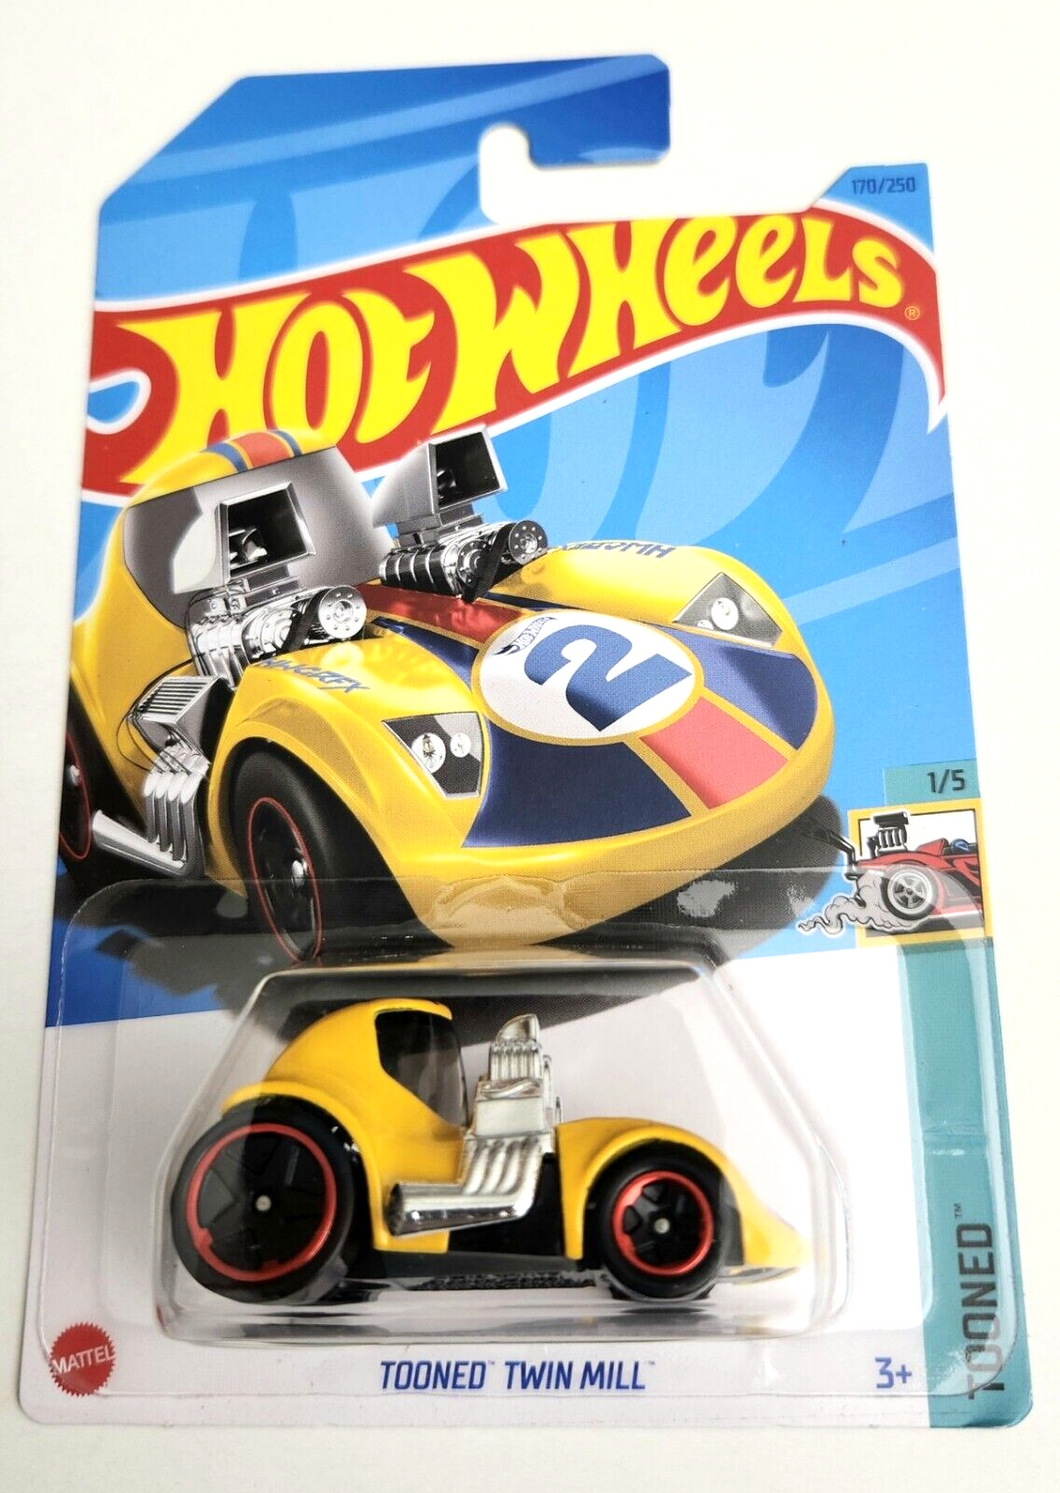 2023 Hot Wheels Tooned Twin Mill Tooned 1/5, 170/250 (Yellow)